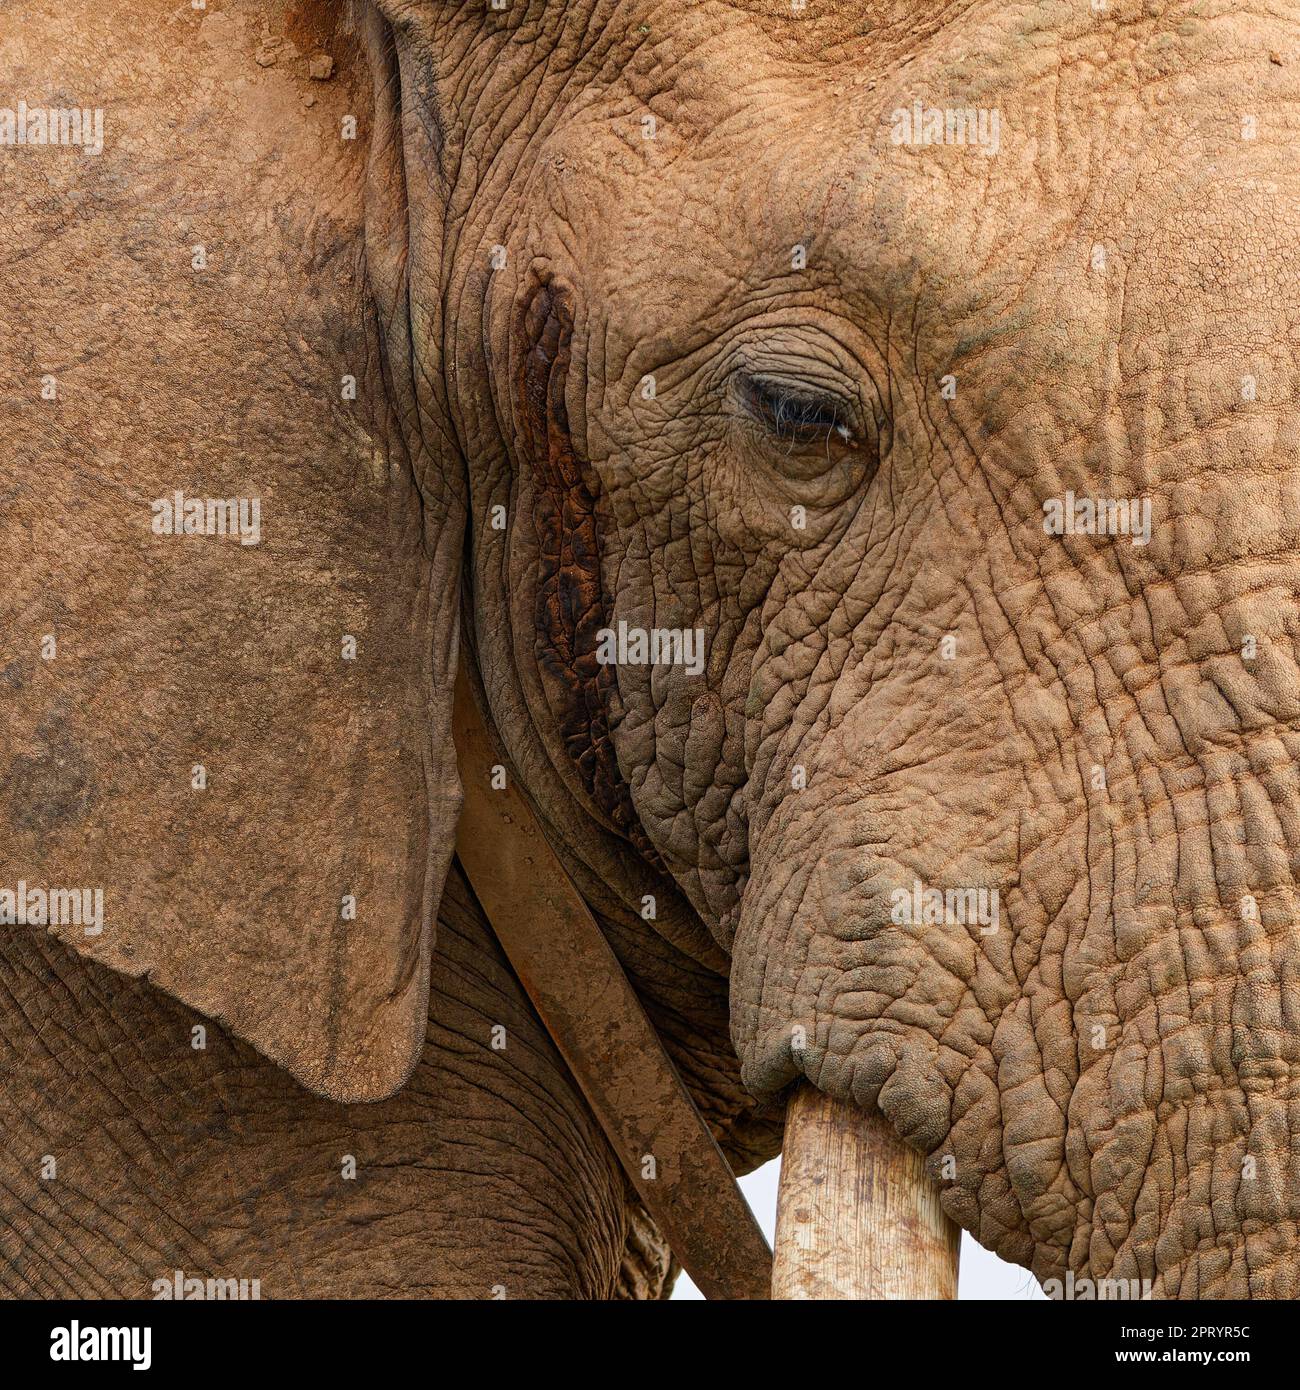 African bush elephant (Loxodonta africana), adult male with radio collar, close-up of the head, animal portrait, detail, Addo Elephant National Park, Stock Photo